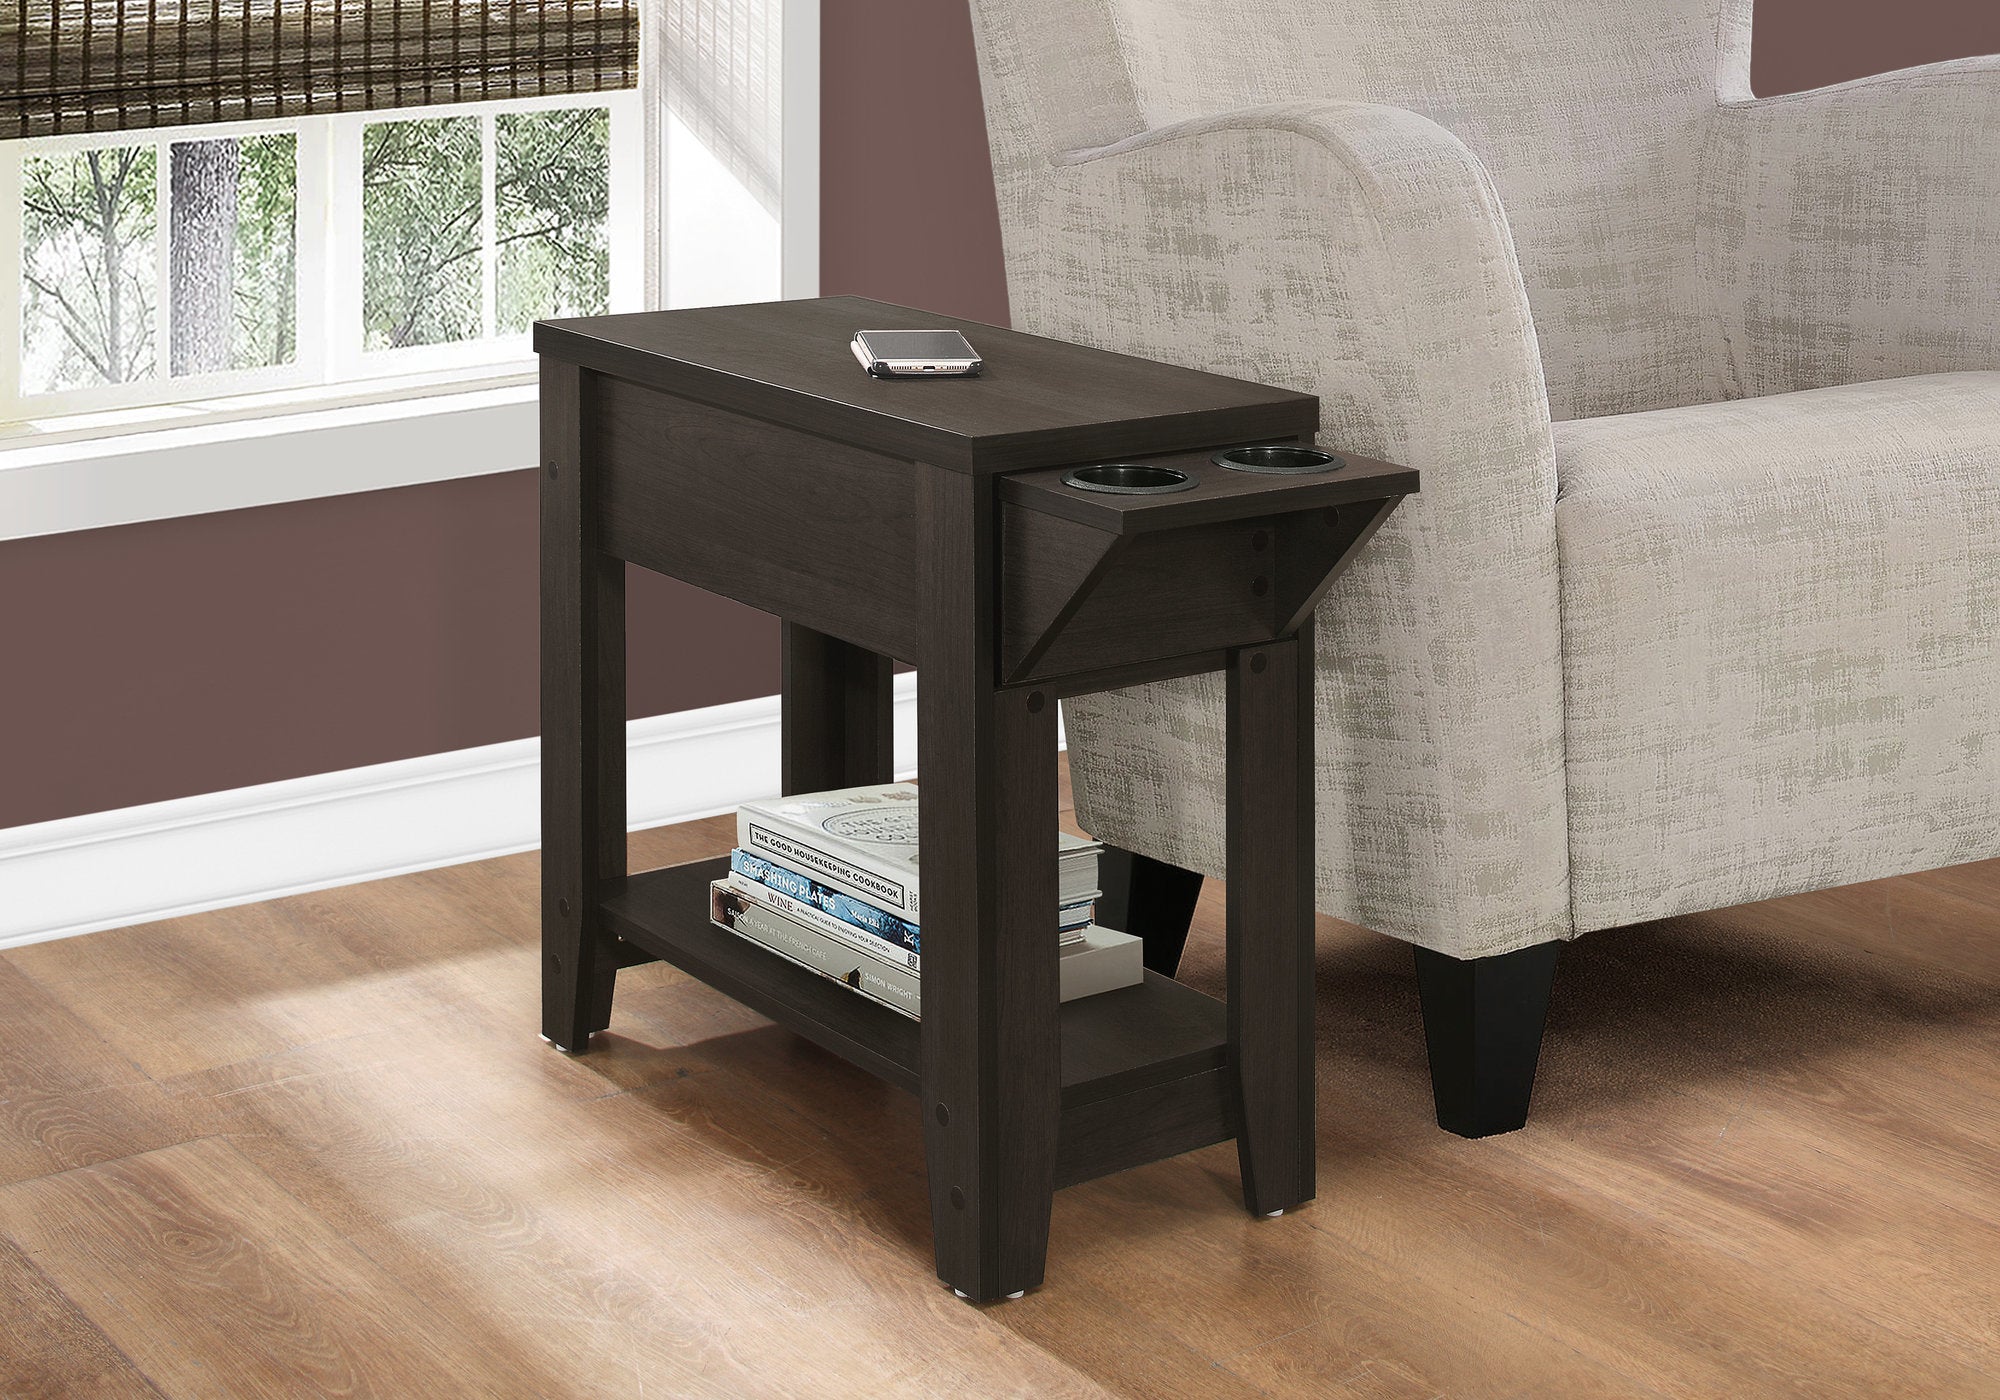 MN-673197    Accent Table, Side, End, Storage, Lamp, Living Room, Bedroom, Laminate, Dark Brown, Contemporary, Modern